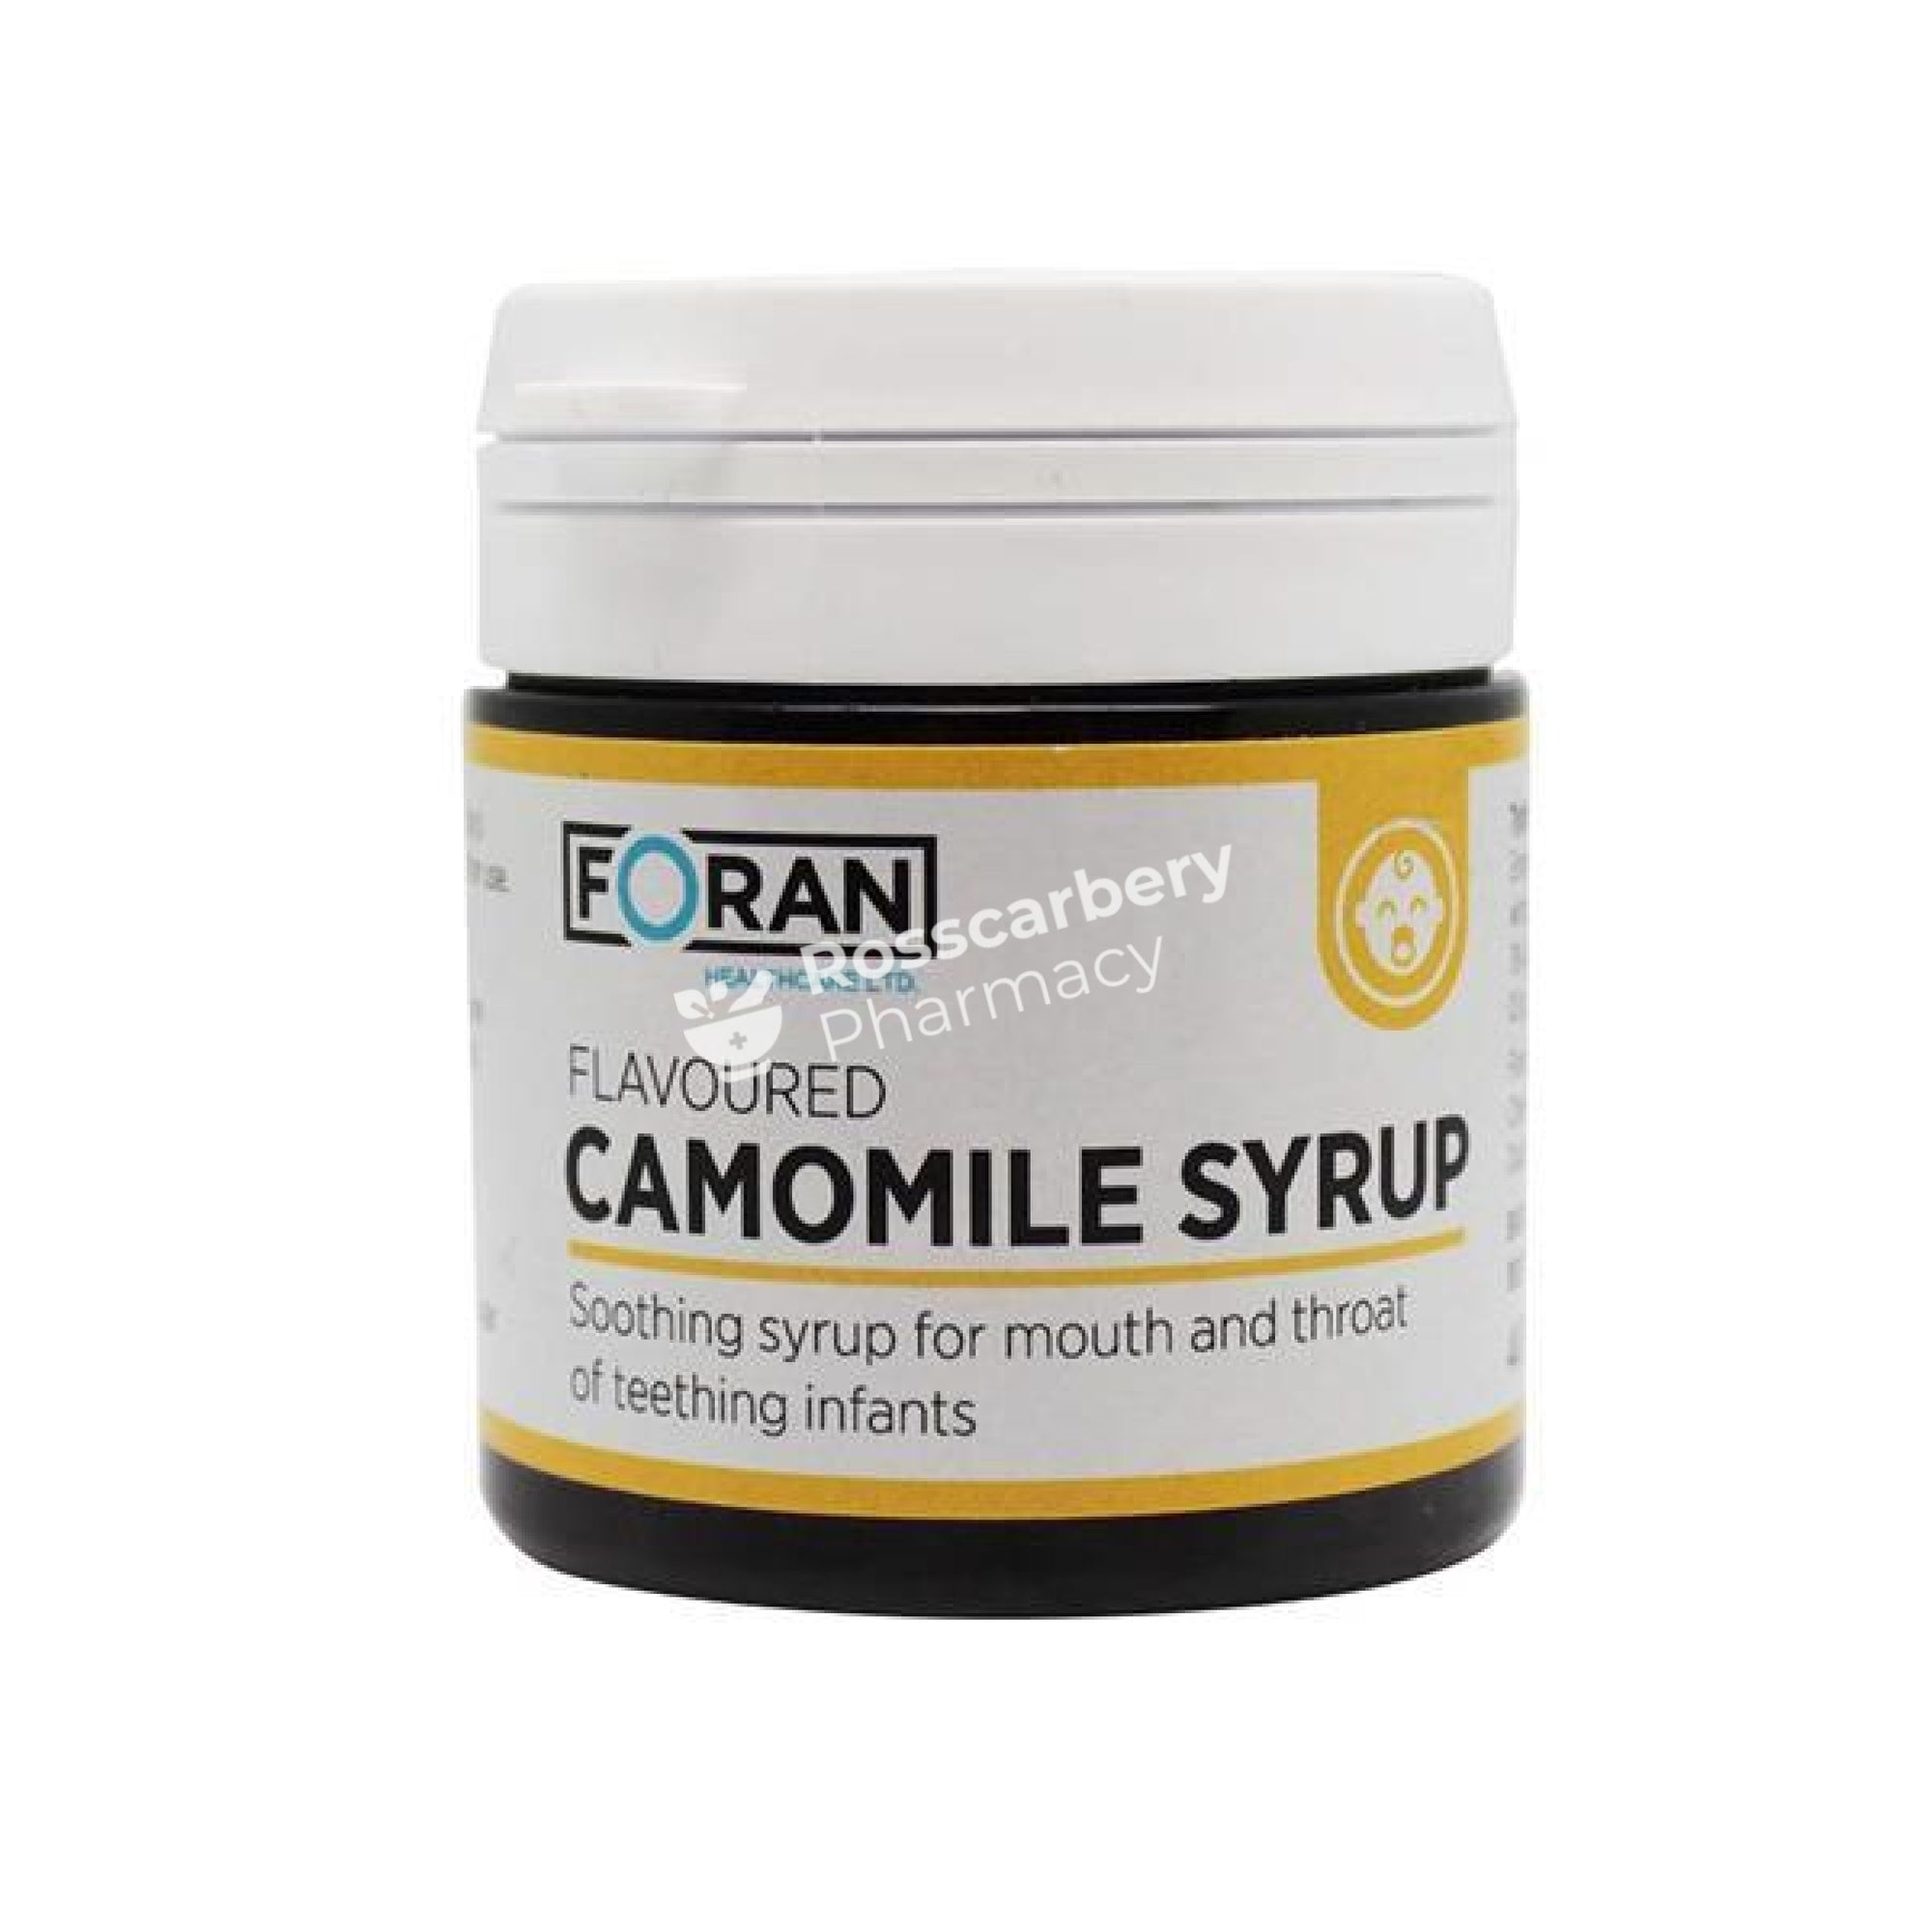 Foran Flavoured Camomile Syrup For Teething Infants